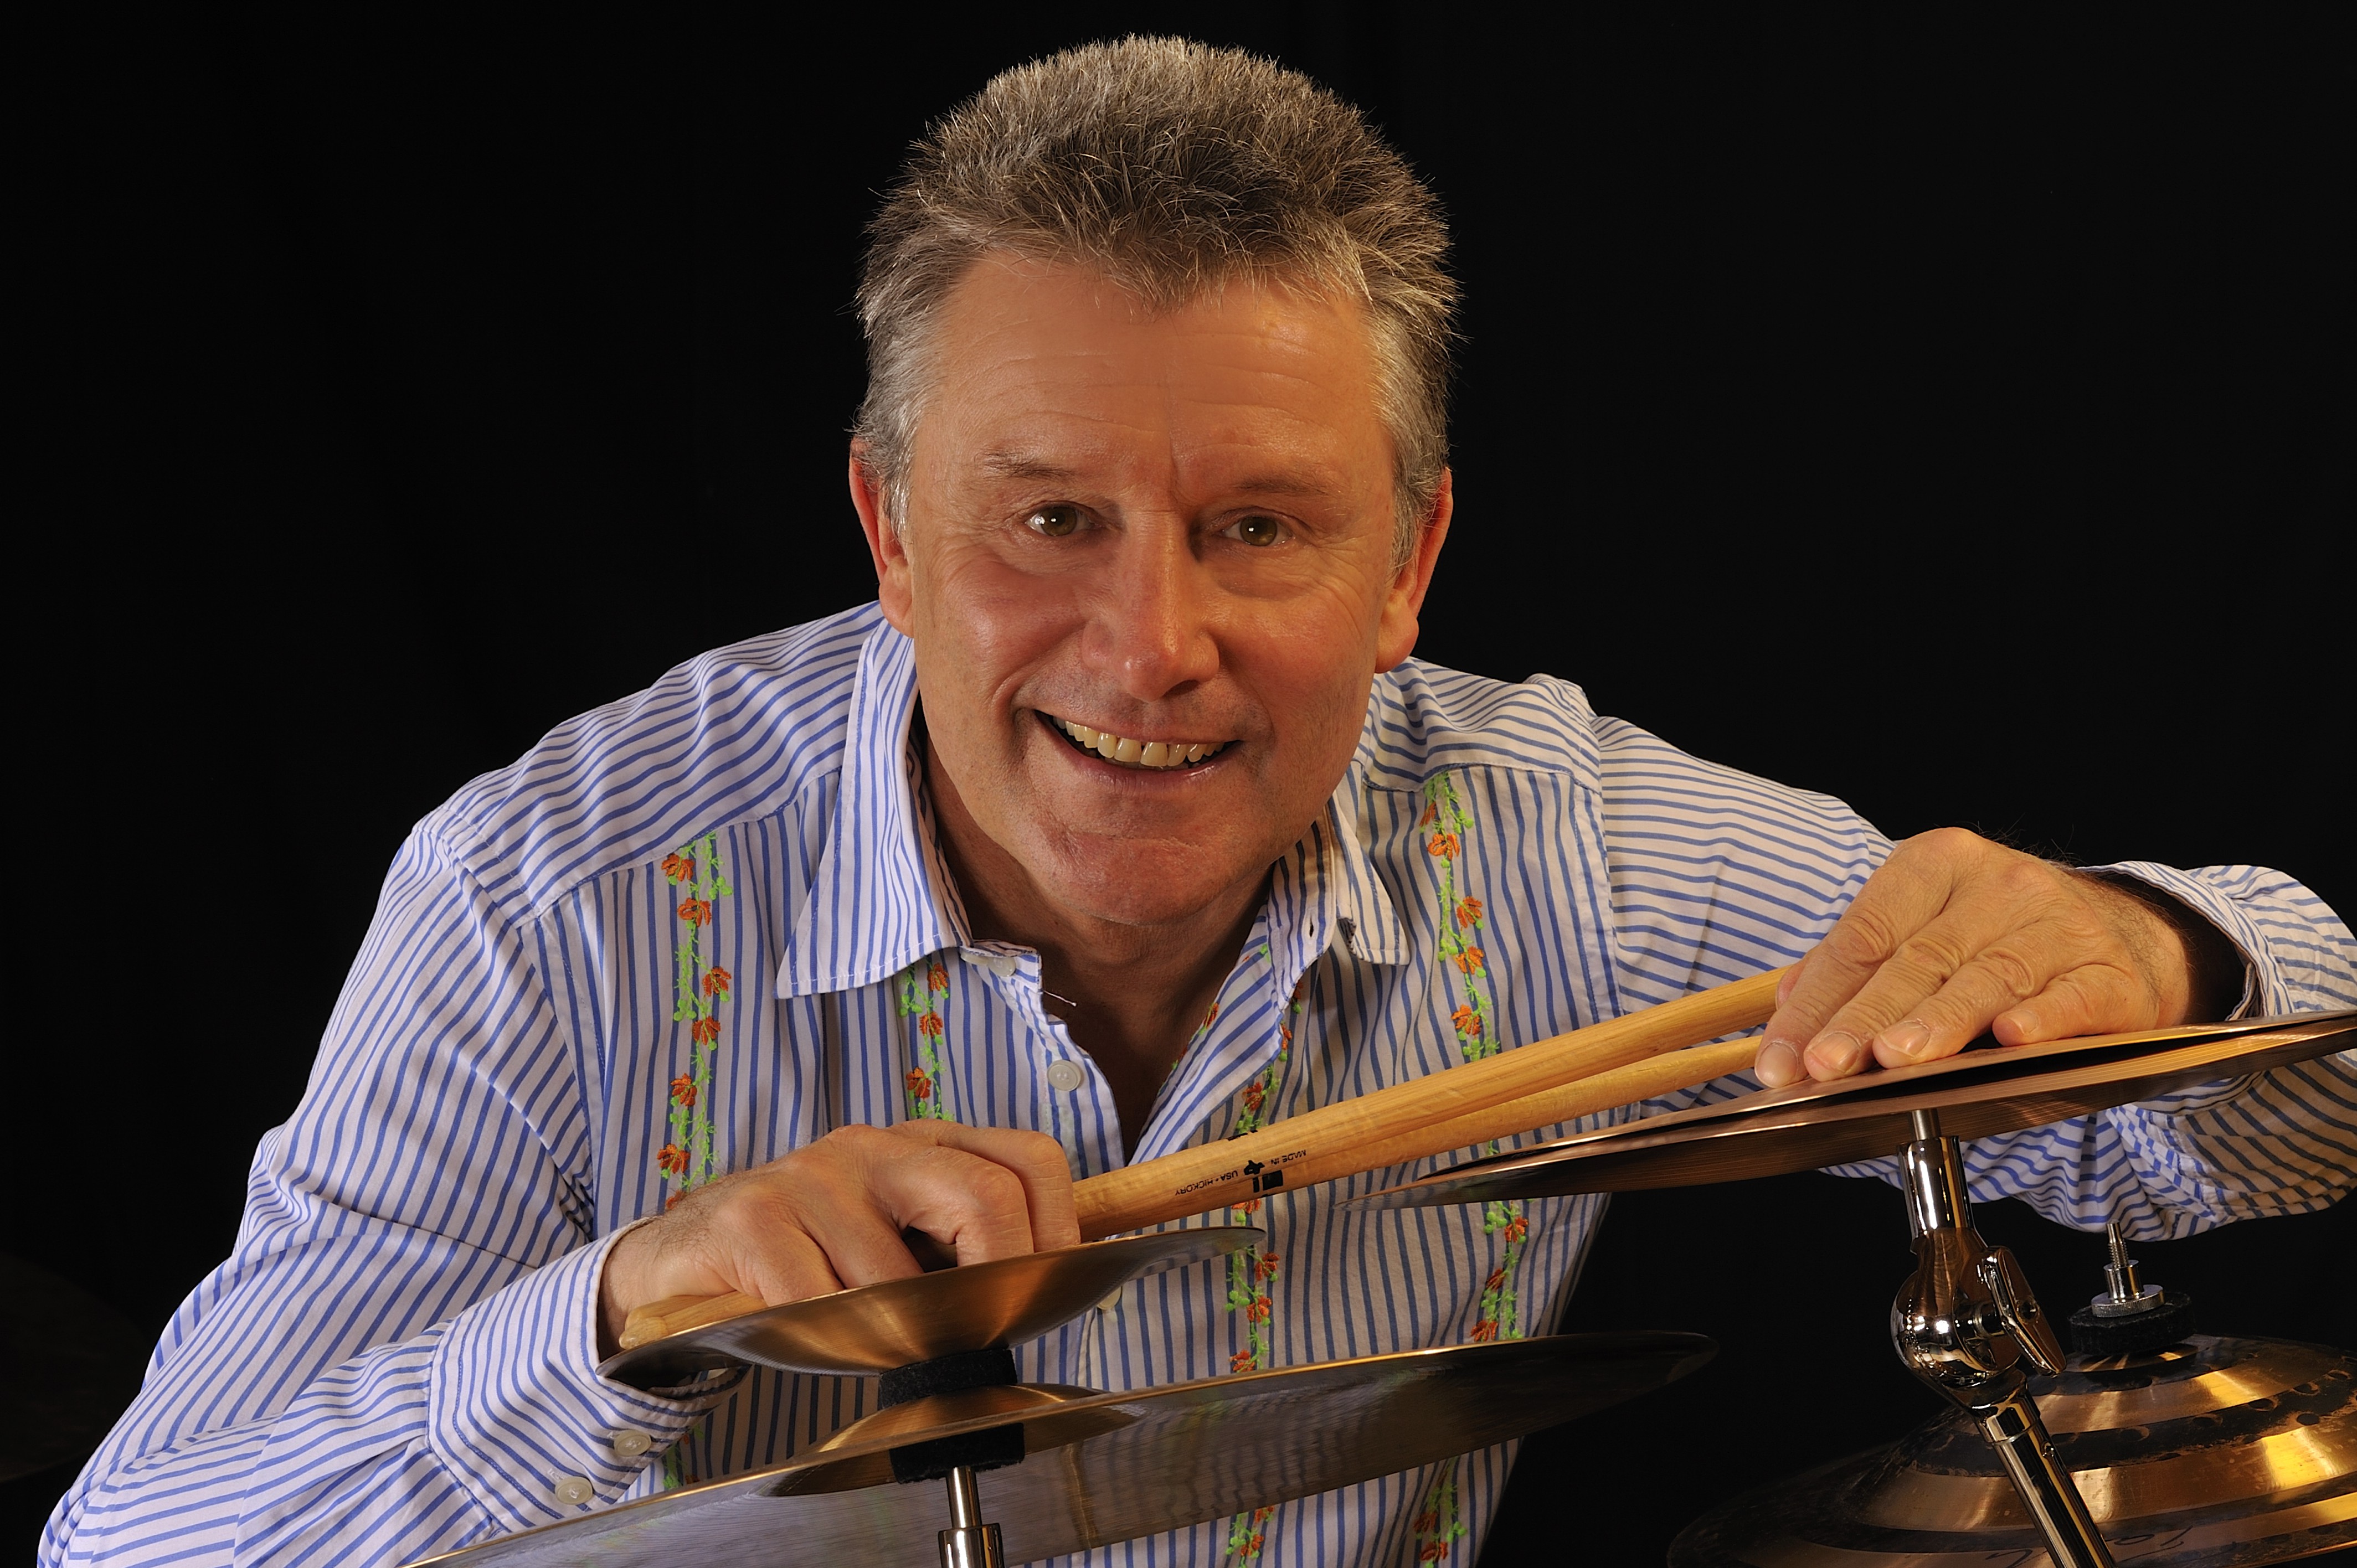 CARL PALMER PAYS TRIBUTE TO THE LEGACY OF KEITH EMERSON AND ELP